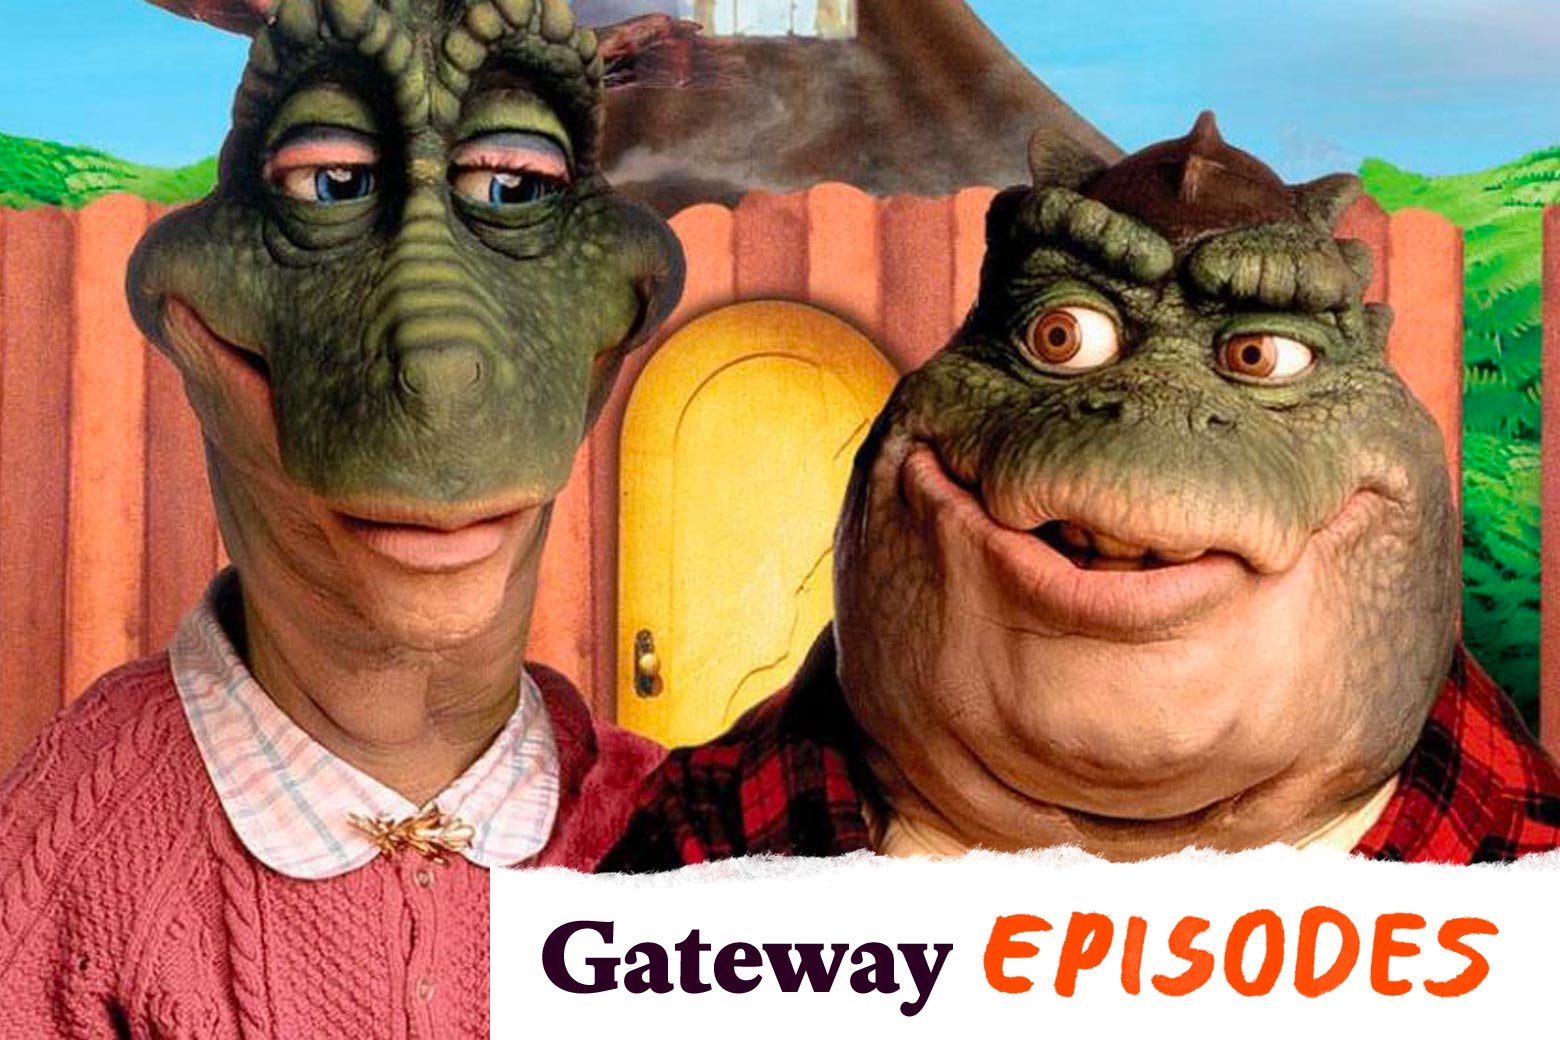 Two dinosaur puppets stand in front of a fence with a door. One wears a pink sweater. Her squatter companion wears a red checkered shirt. A tearaway label in the corner reads "Gateway Episodes."